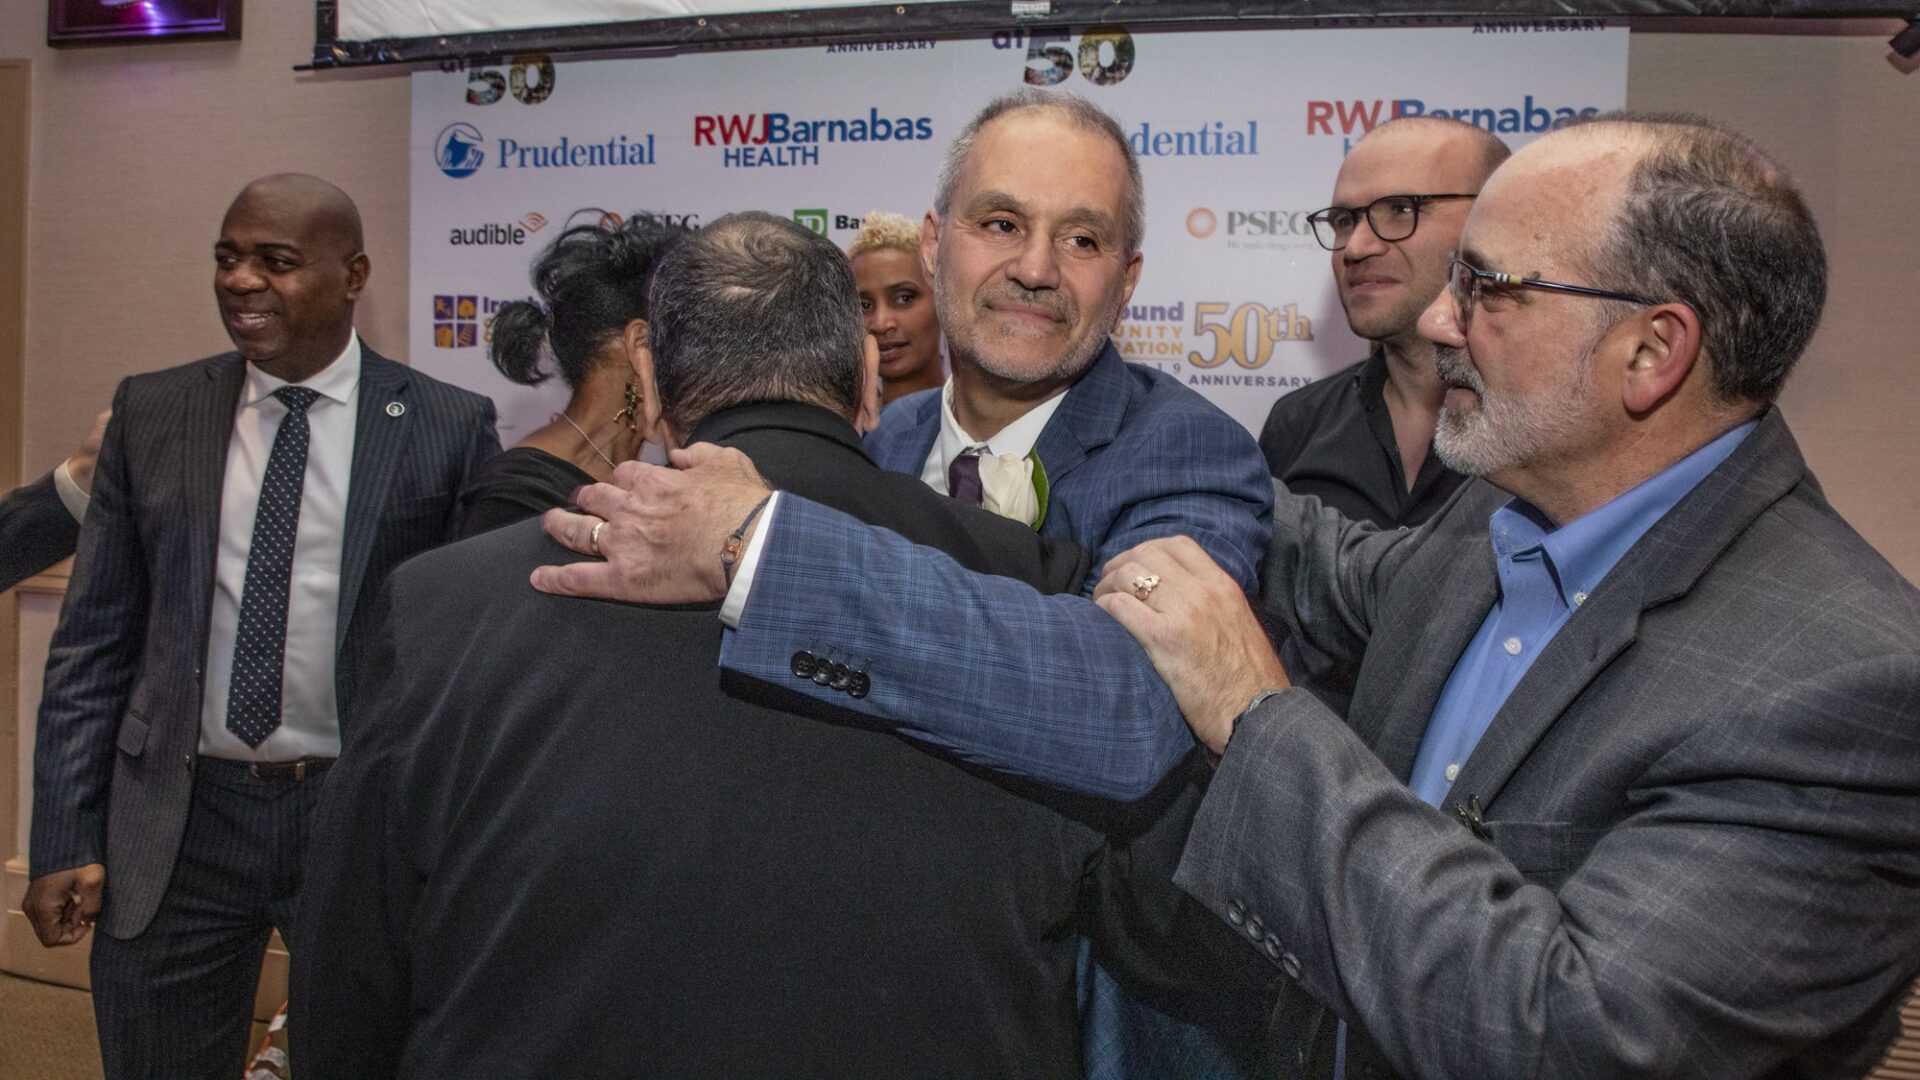 A group of men hugging each other at an event.